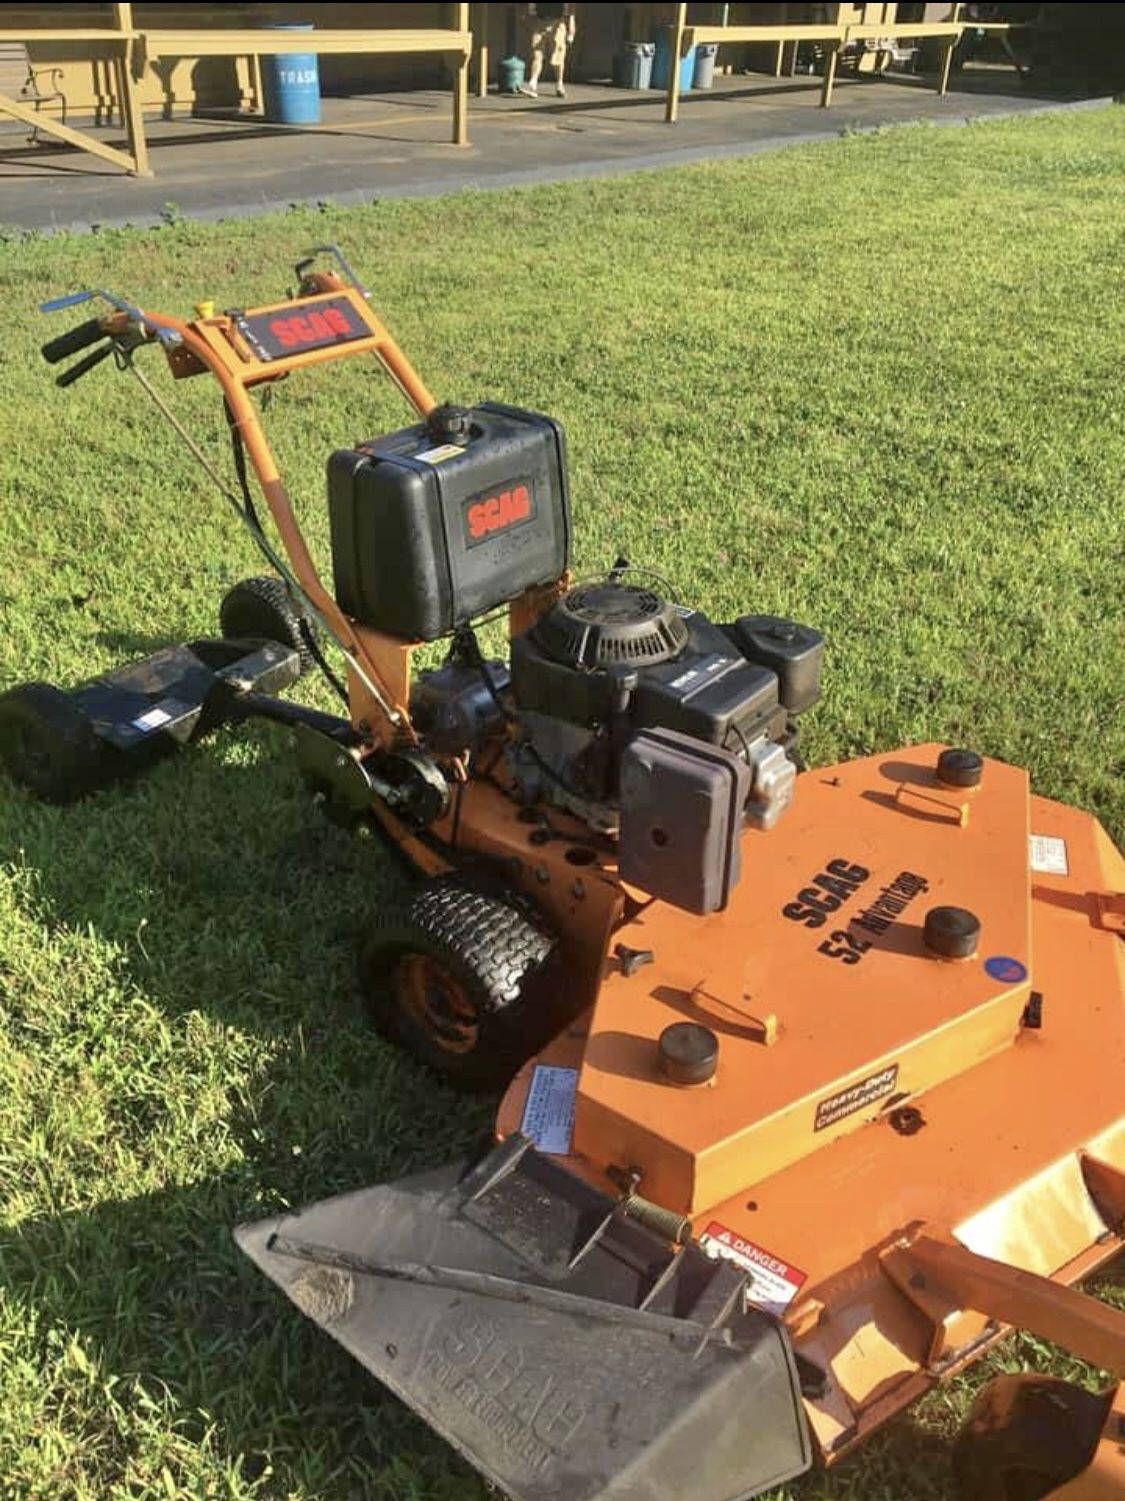 52” Scag lawn mower (Great condition)